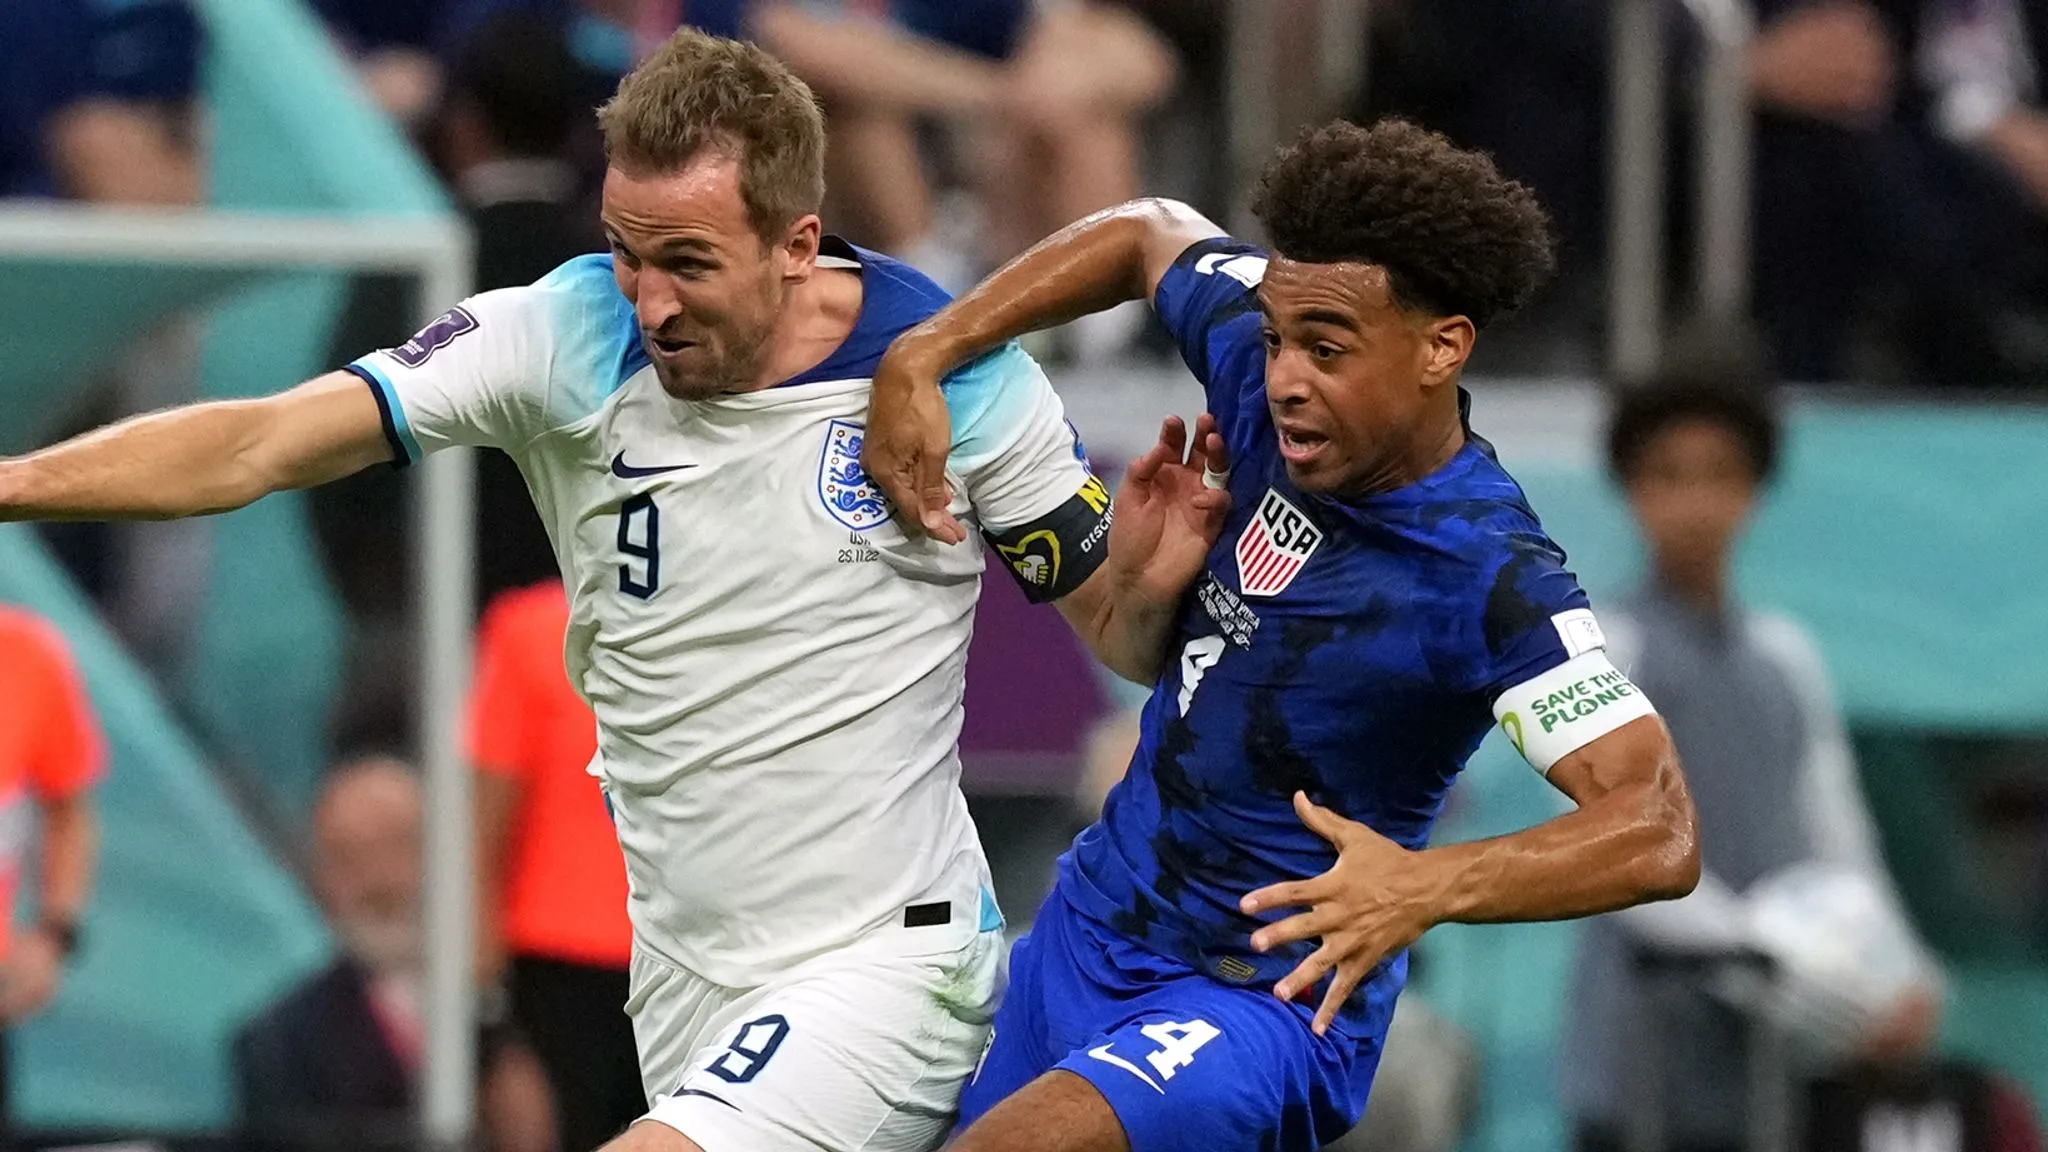 USA tough it out against England in goalless draw in Group B matchup